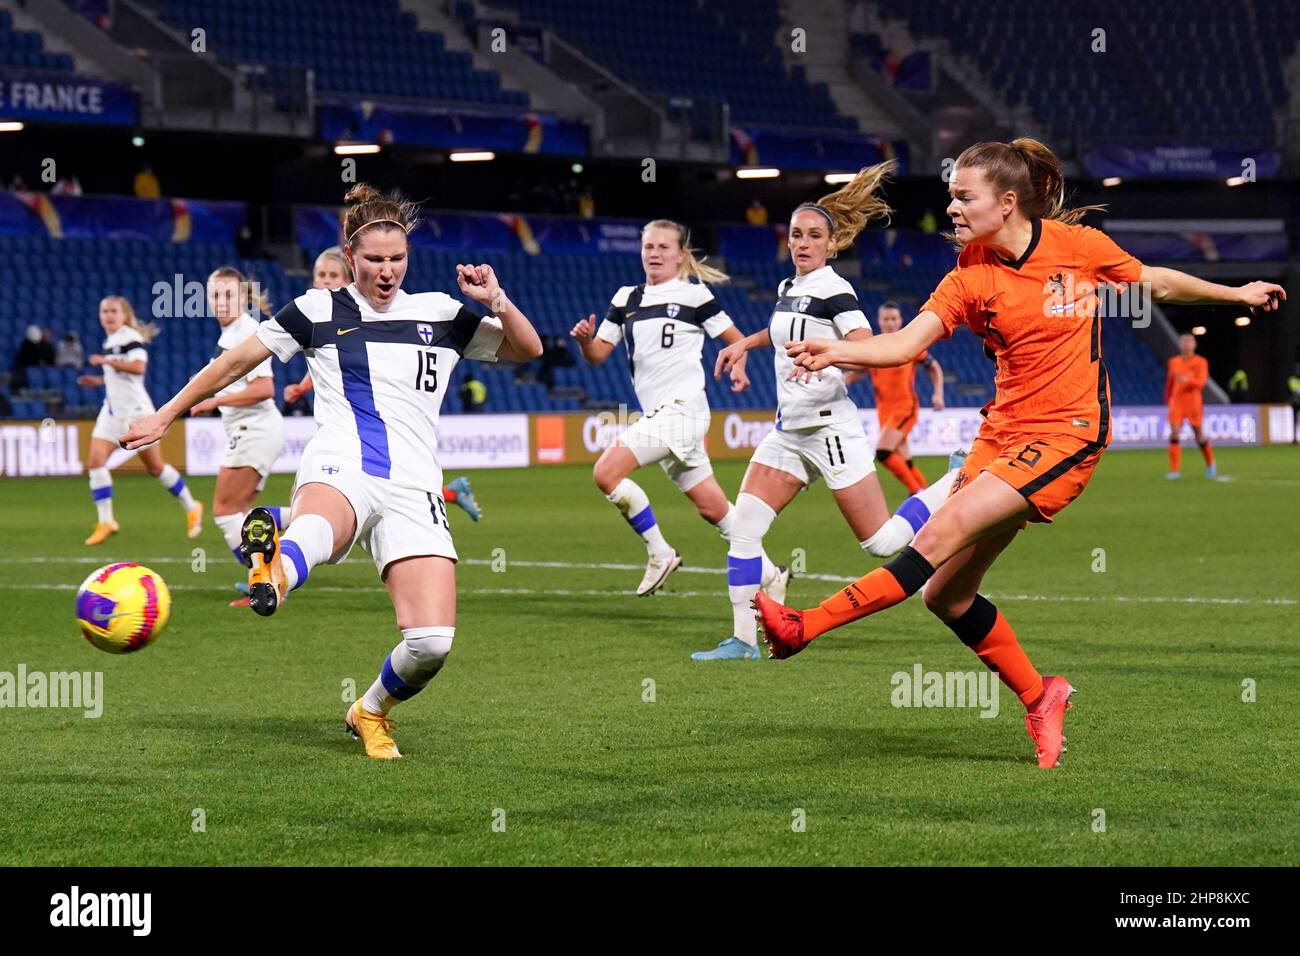 LE HAVRE, FRANCE - FEBRUARY 19: Kayleigh van Dooren of the Netherlands and Anna Westerlund of Finland during the Tournoi de France 2022 match between Finland and Netherlands at Stade Oceane on February 19, 2022 in Le Havre, France (Photo by Rene Nijhuis/Orange Pictures) Stock Photo